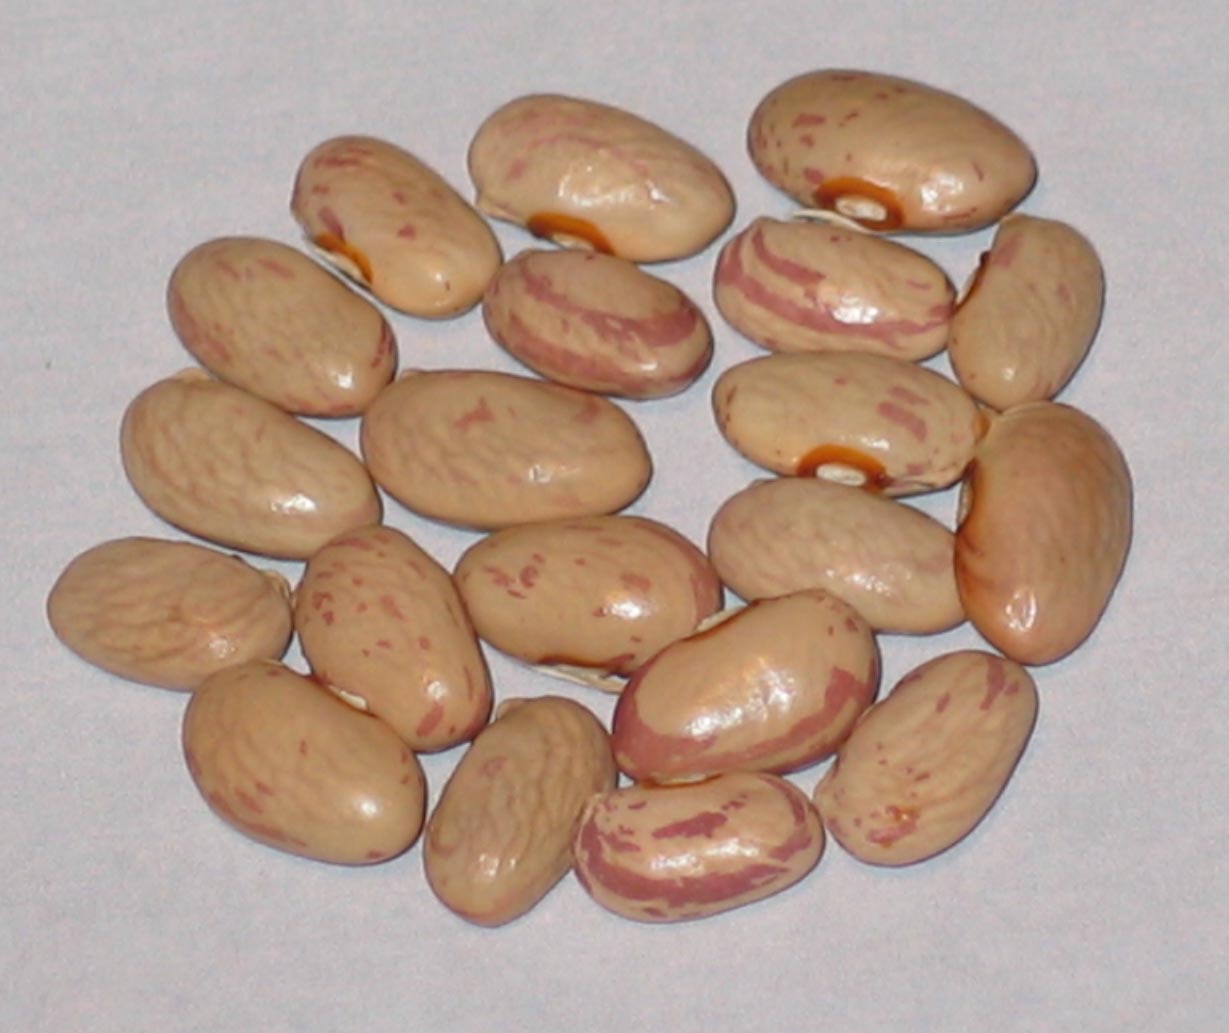 image of Heinrich 1 beans